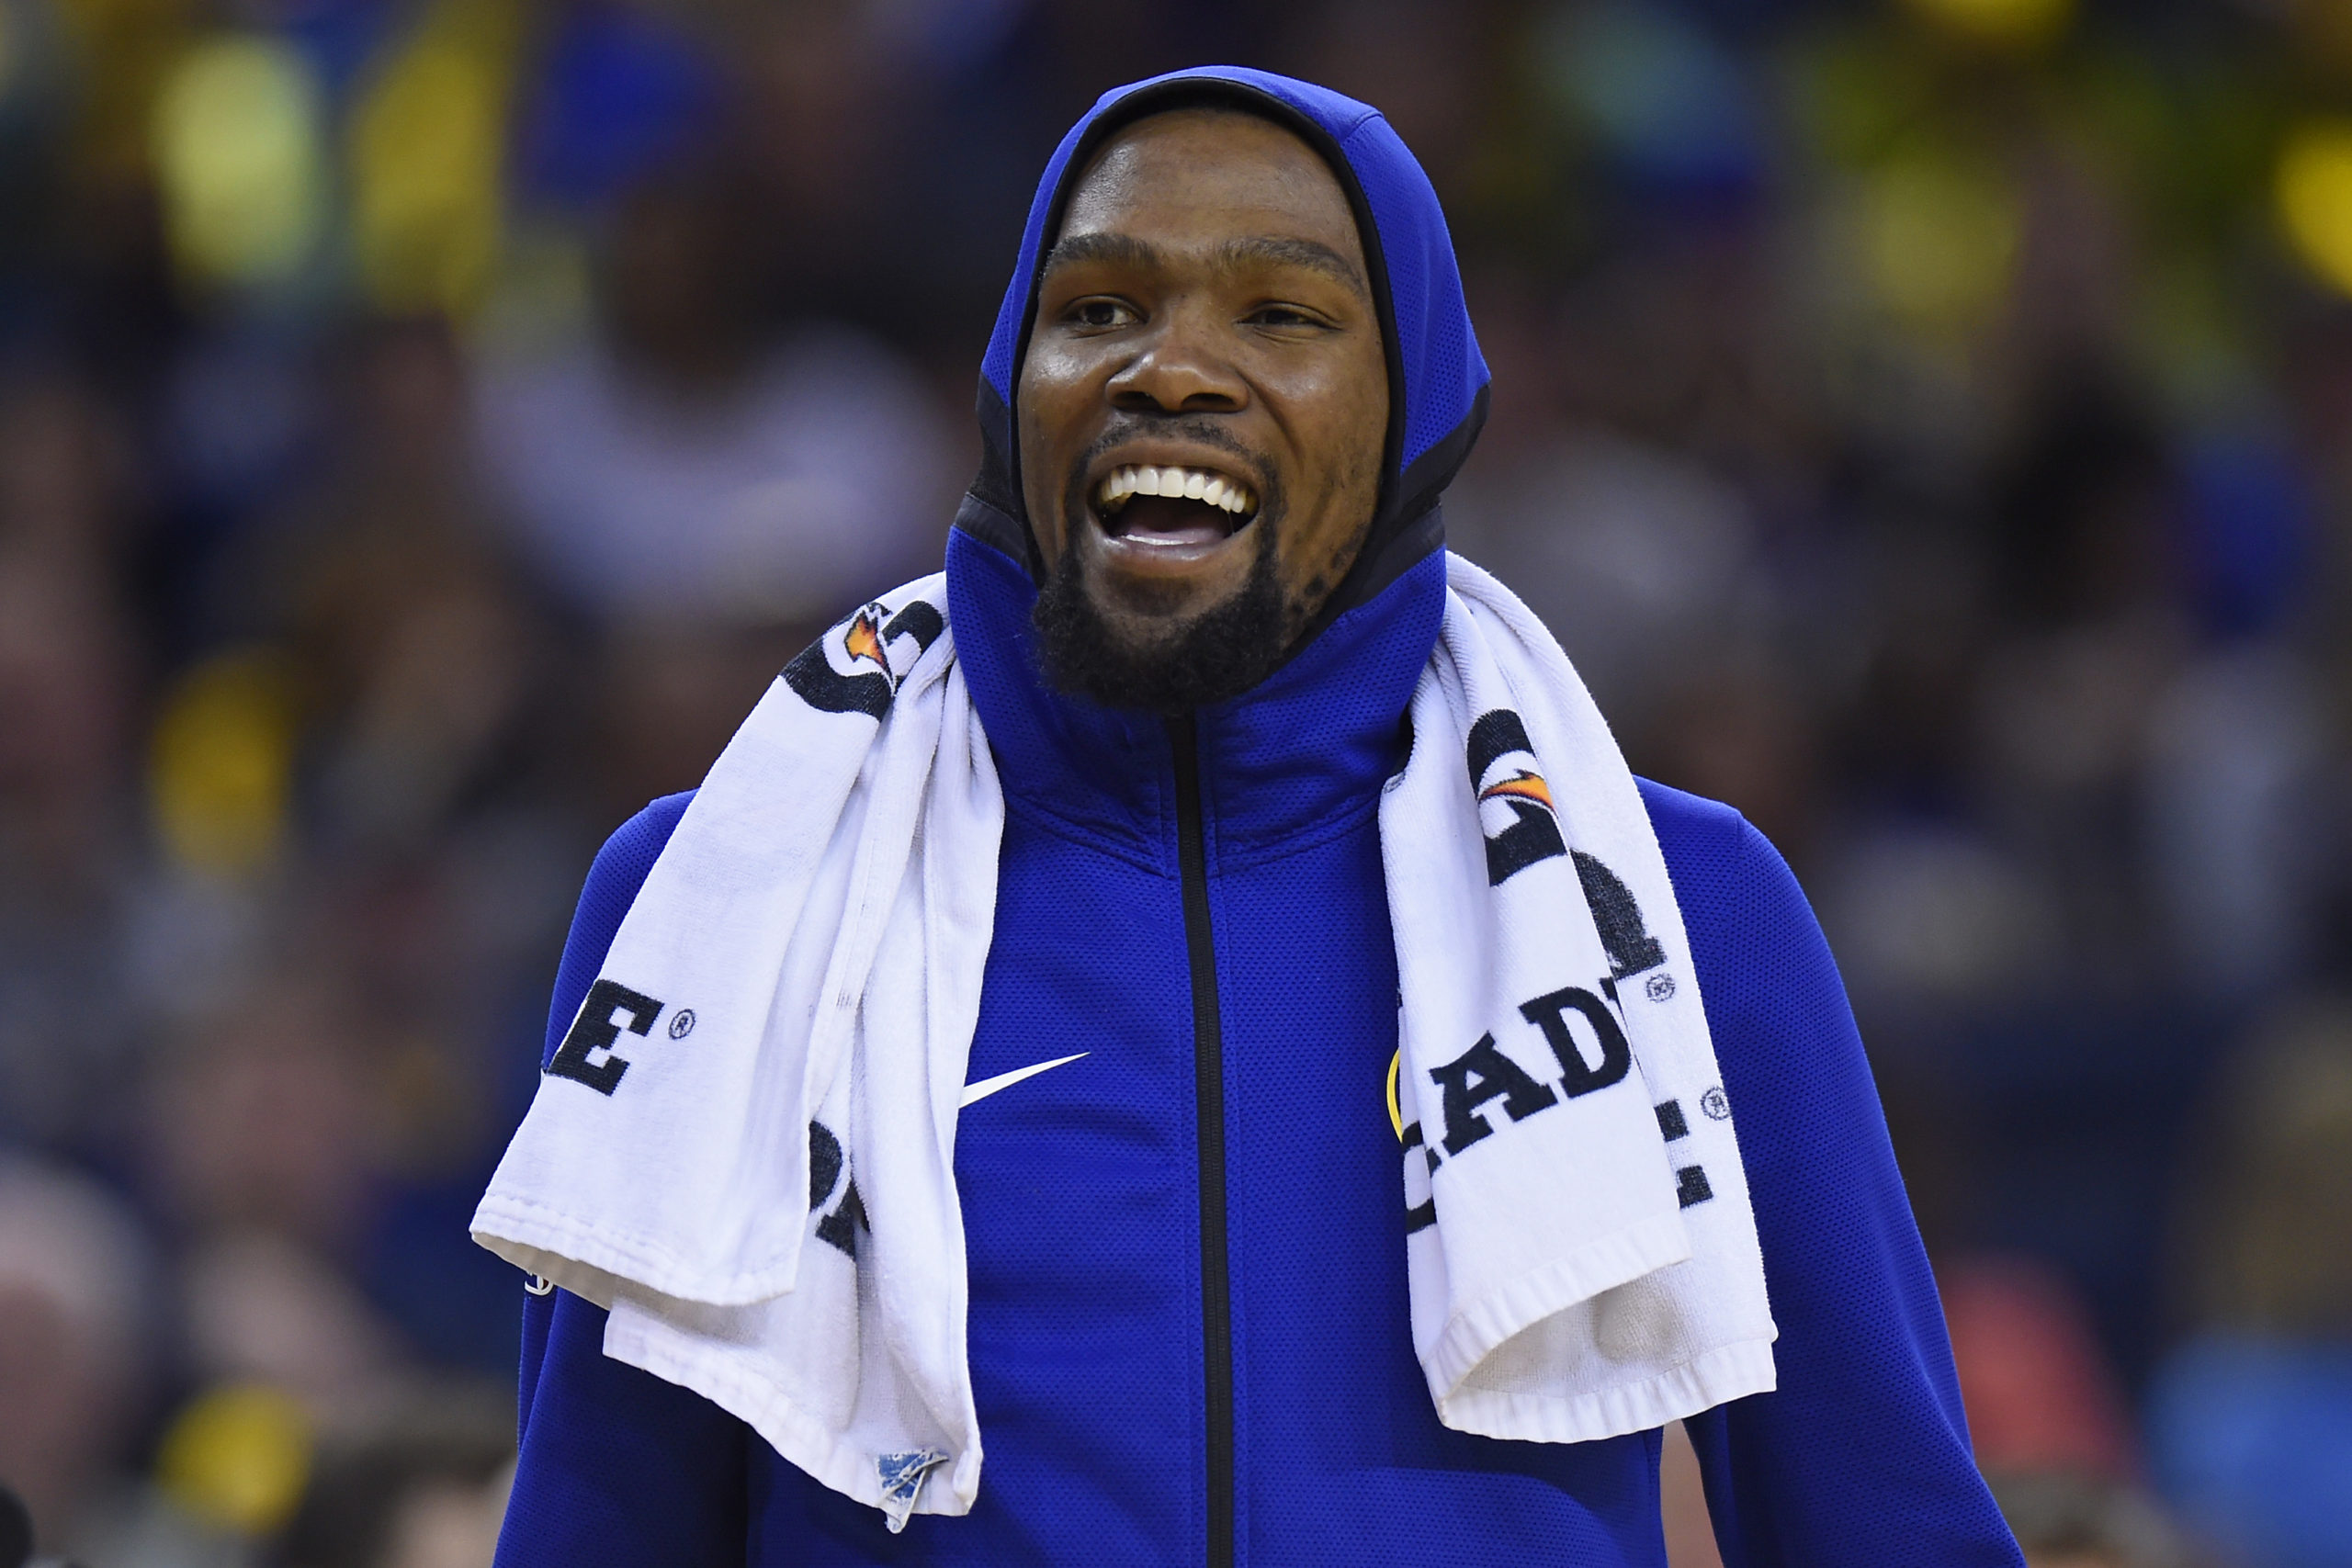 Kevin Durant Gets Ejected, Calls Ref “B*tch-As* Motherf*cker” On The Way Out